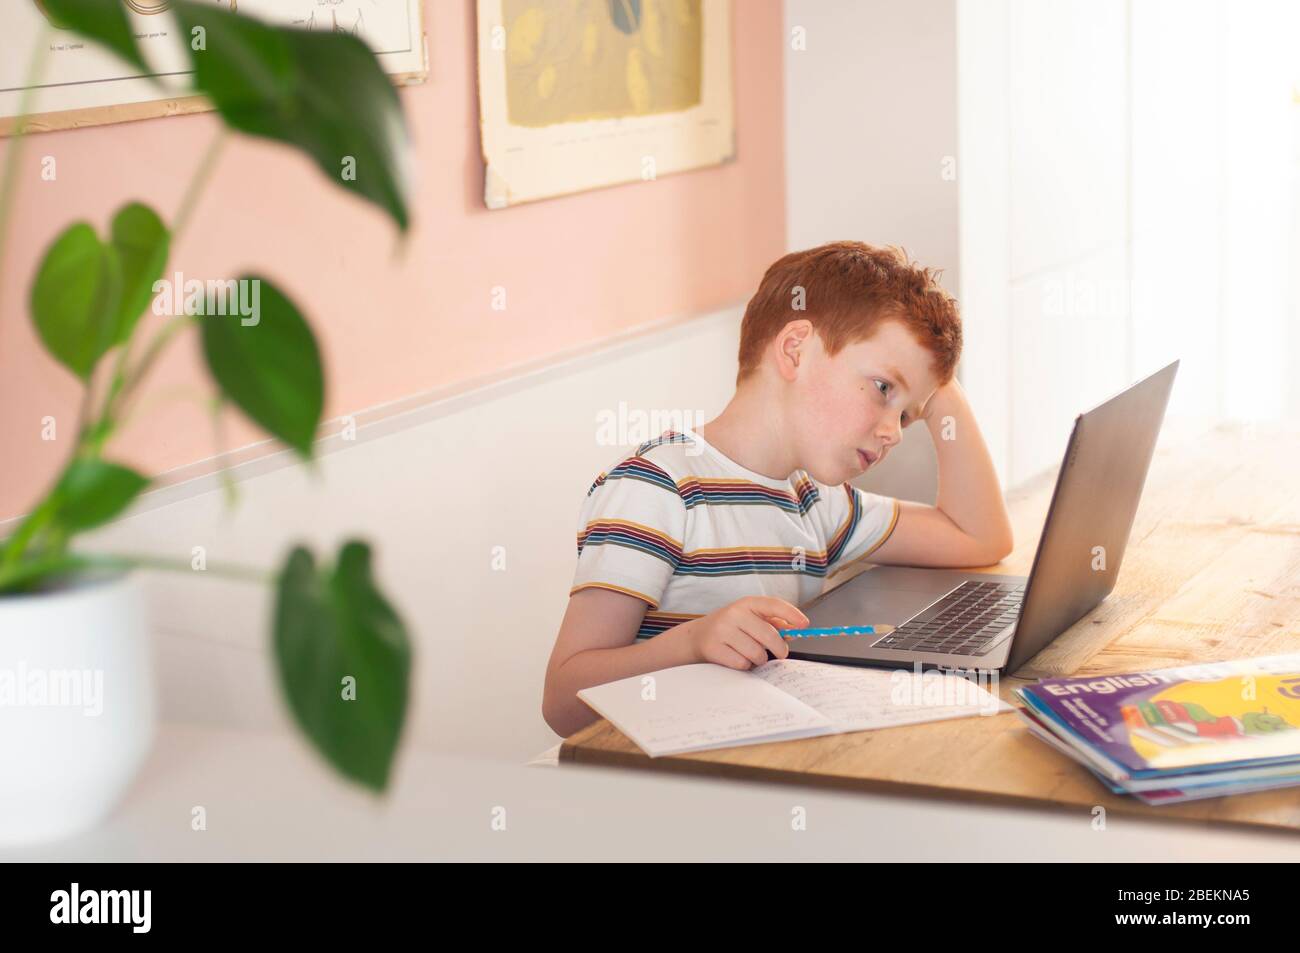 Pre-teen boy focusing on his school work at the computer during homeschooling due to the coronavirus lockdown Stock Photo